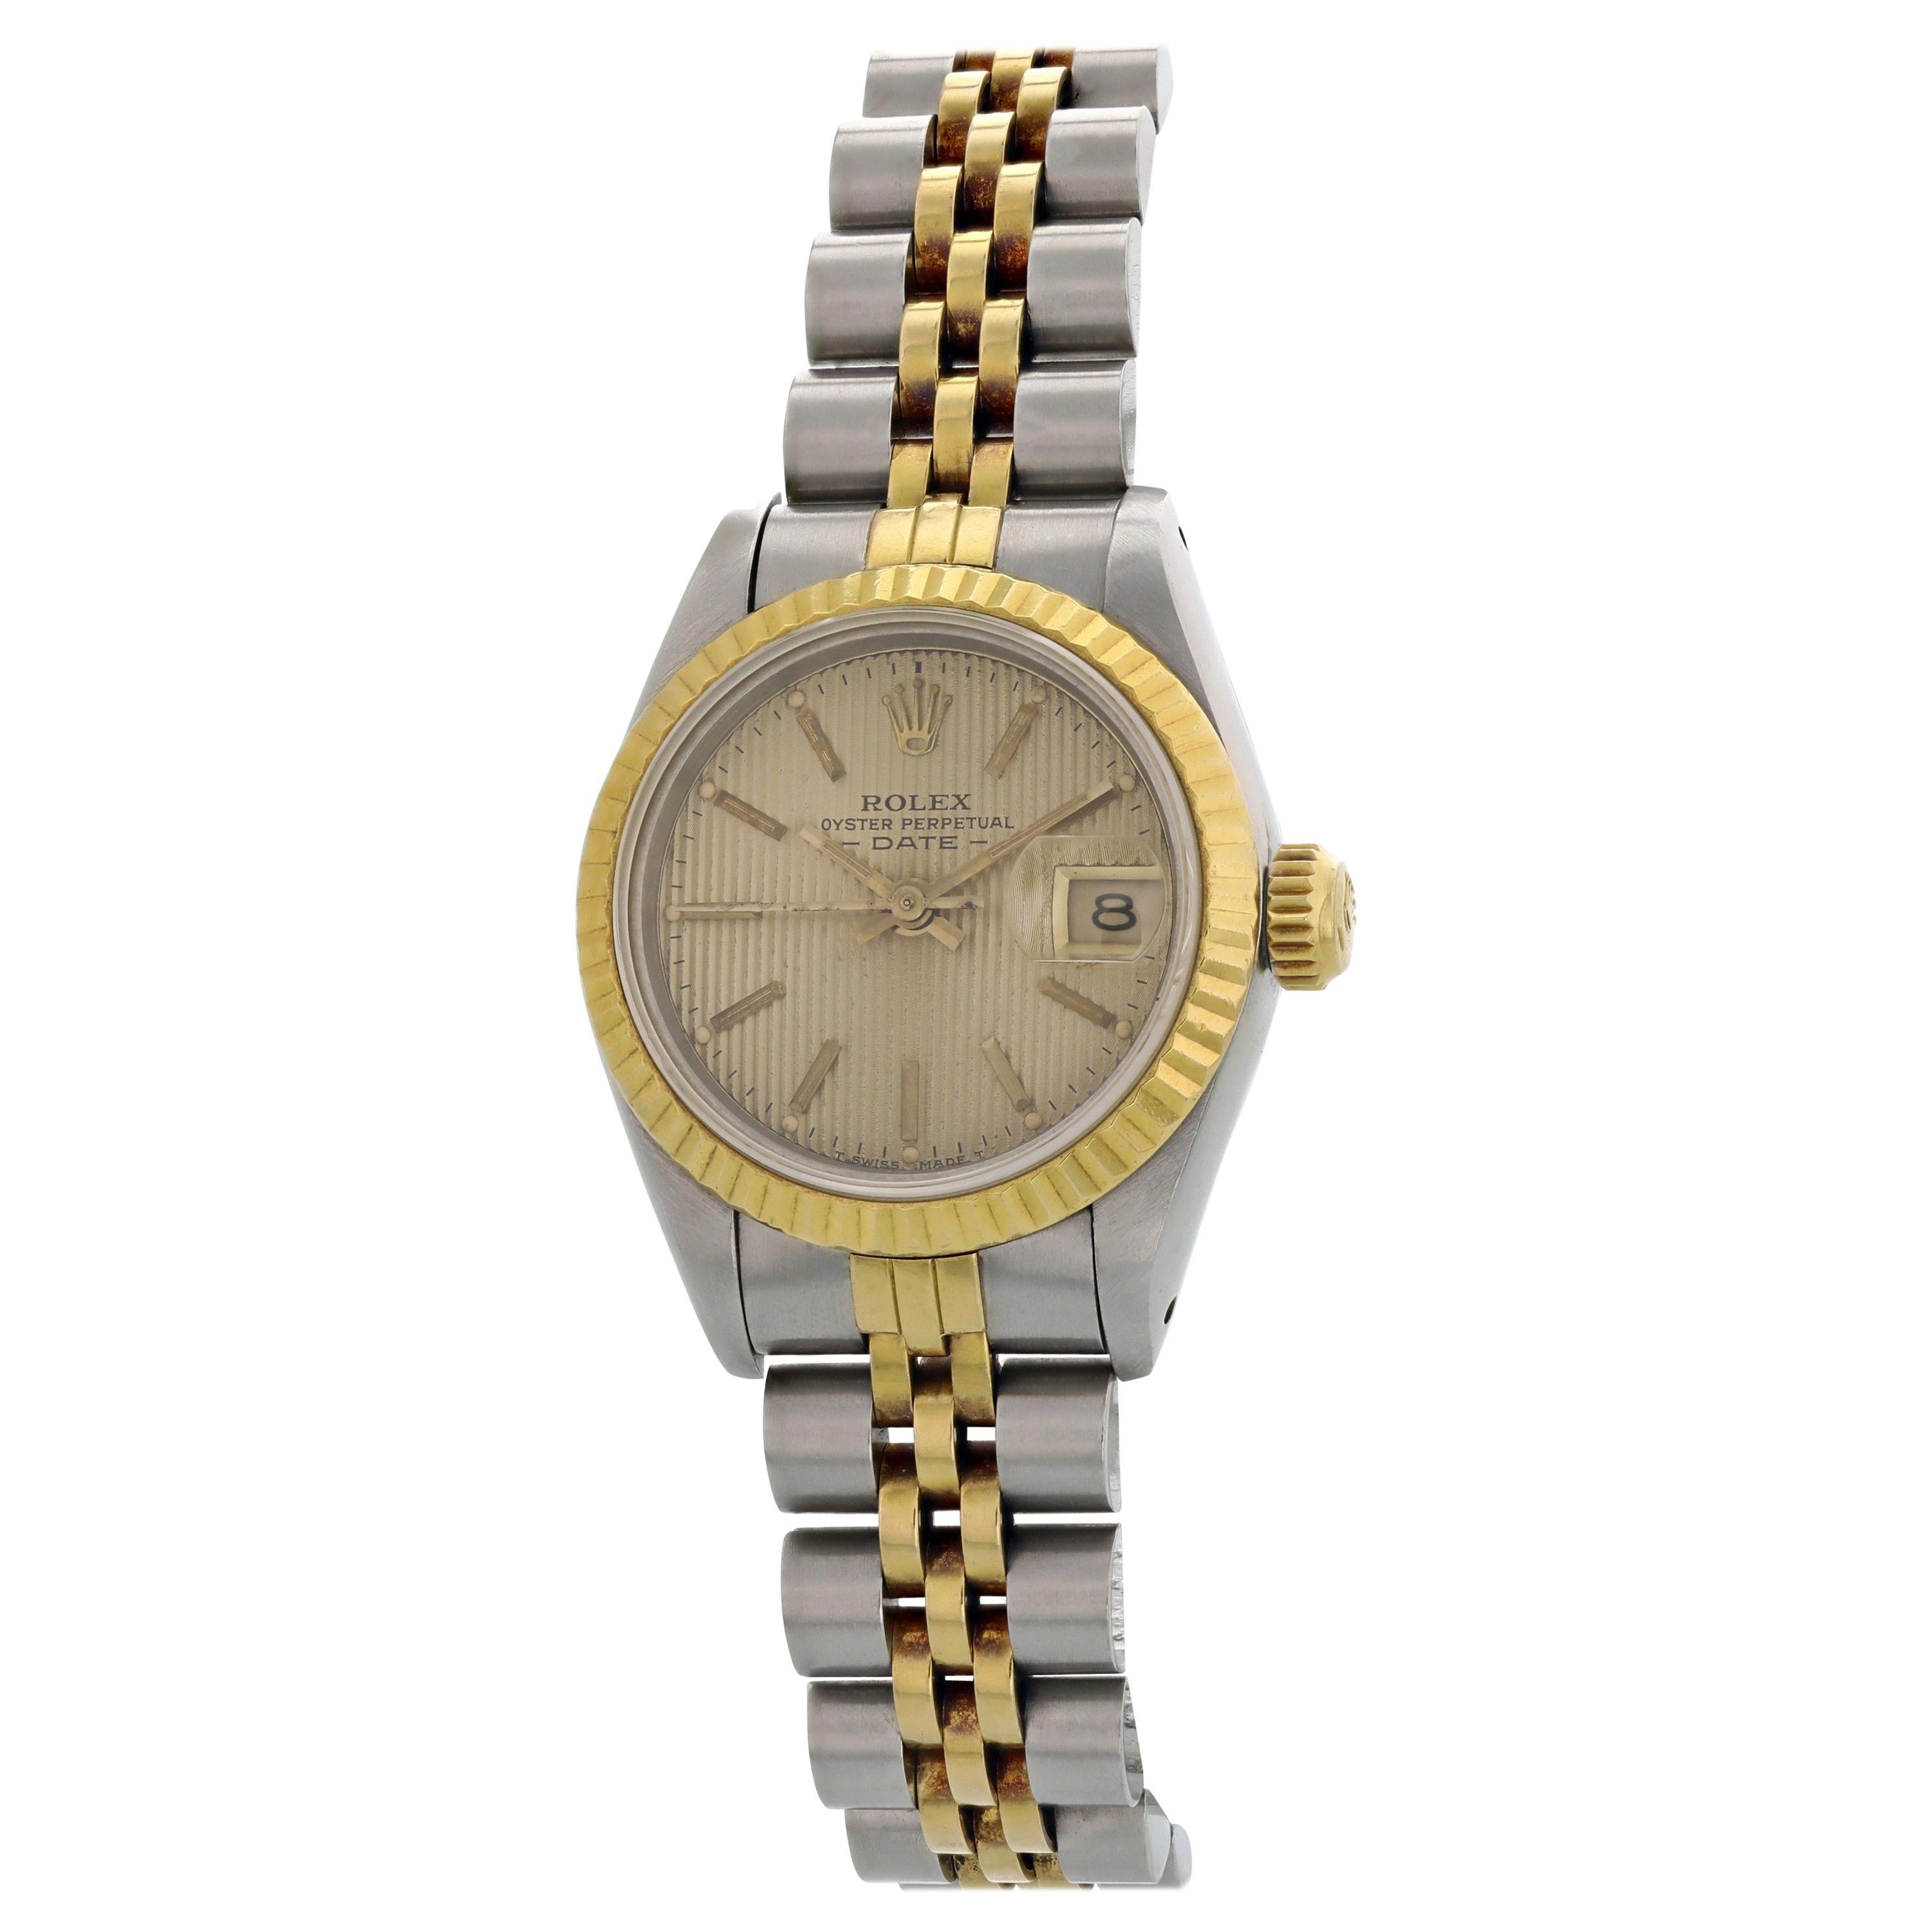 Rolex Oyster Perpetual Datejust 69173 Tapestry Dial Ladies Watch For Sale